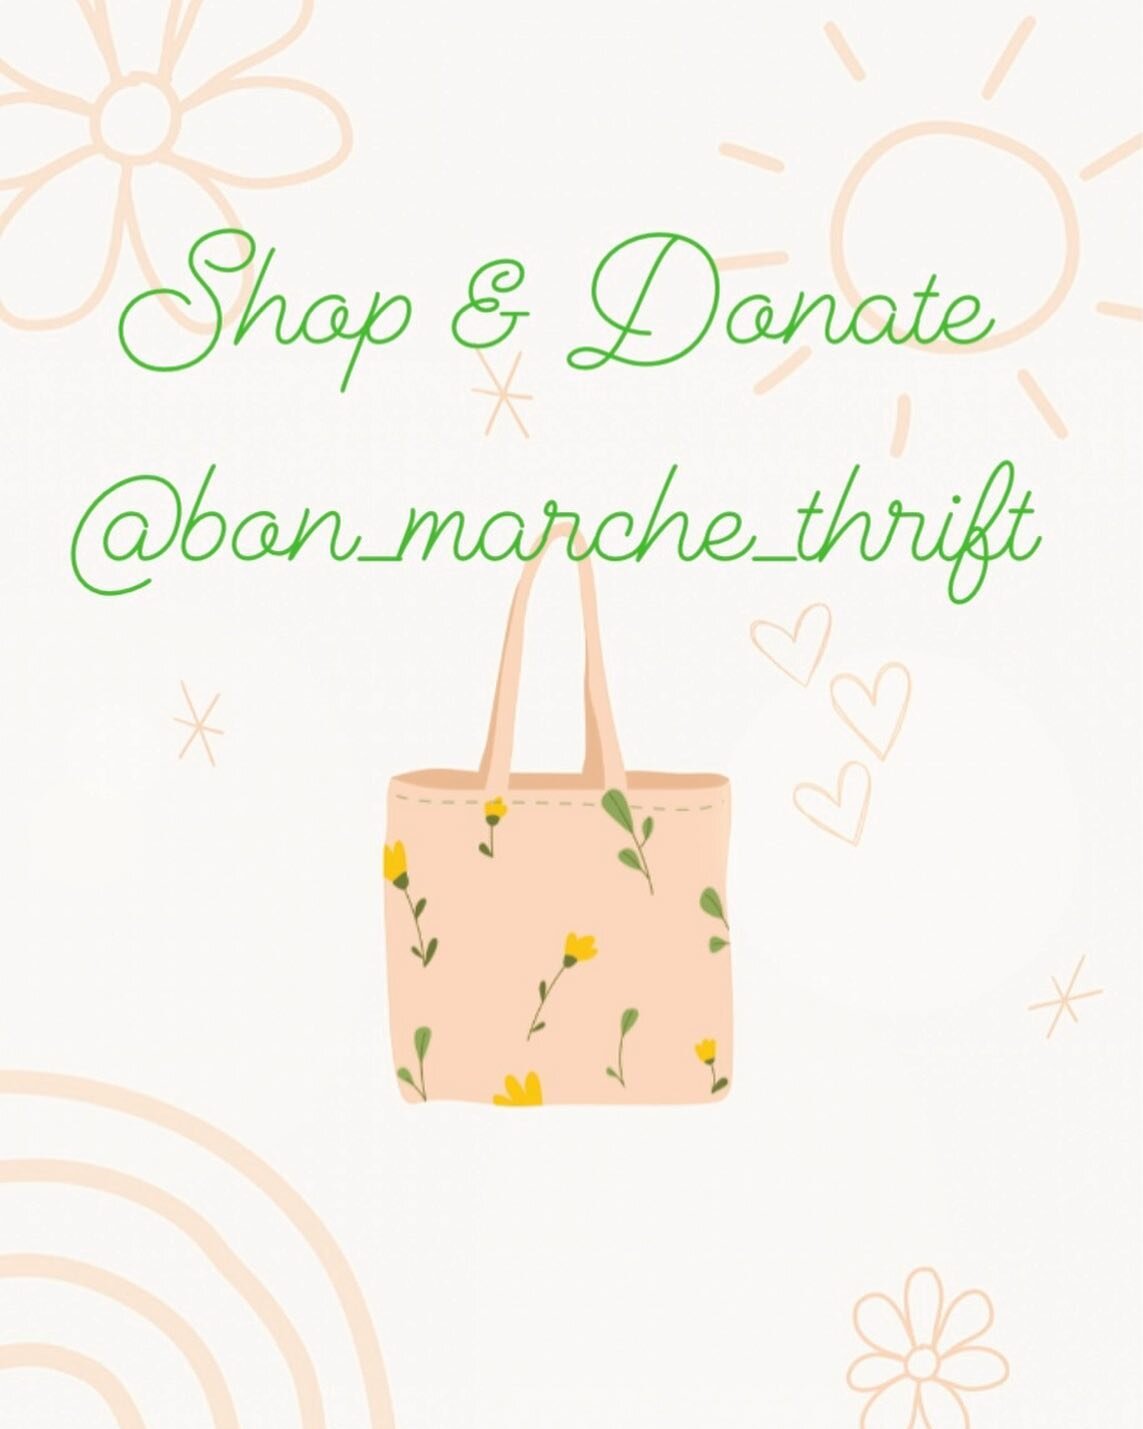 This month @bon_marche_thrift is donating 10% and sponsoring the SHENOMA Scholarship Program🎓🌟

Thank you for participating and making a difference @annabimenyimana 💗

#giveback
#communitylove 
#thriftstorefinds